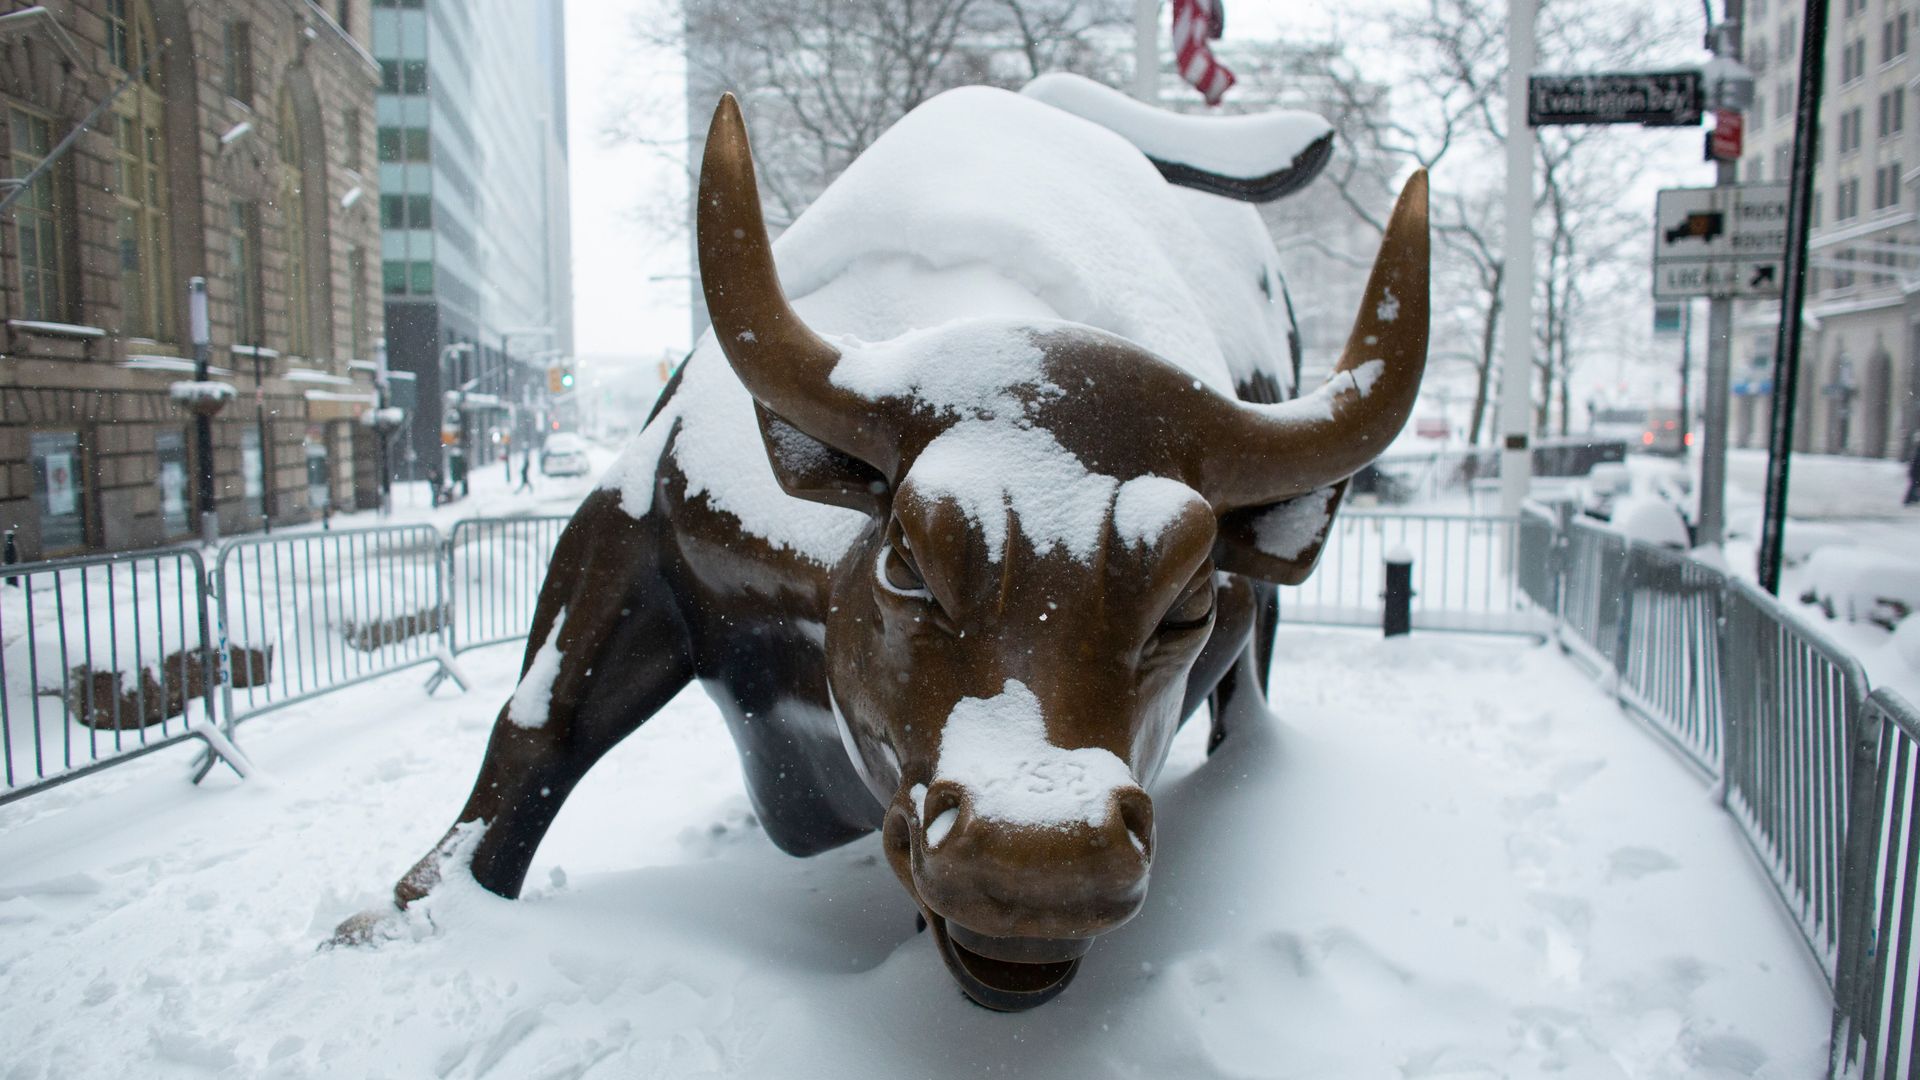 The Charging Bull Statue is covered by snow in Lower Manhattan during a winter storm on February 1, 2021